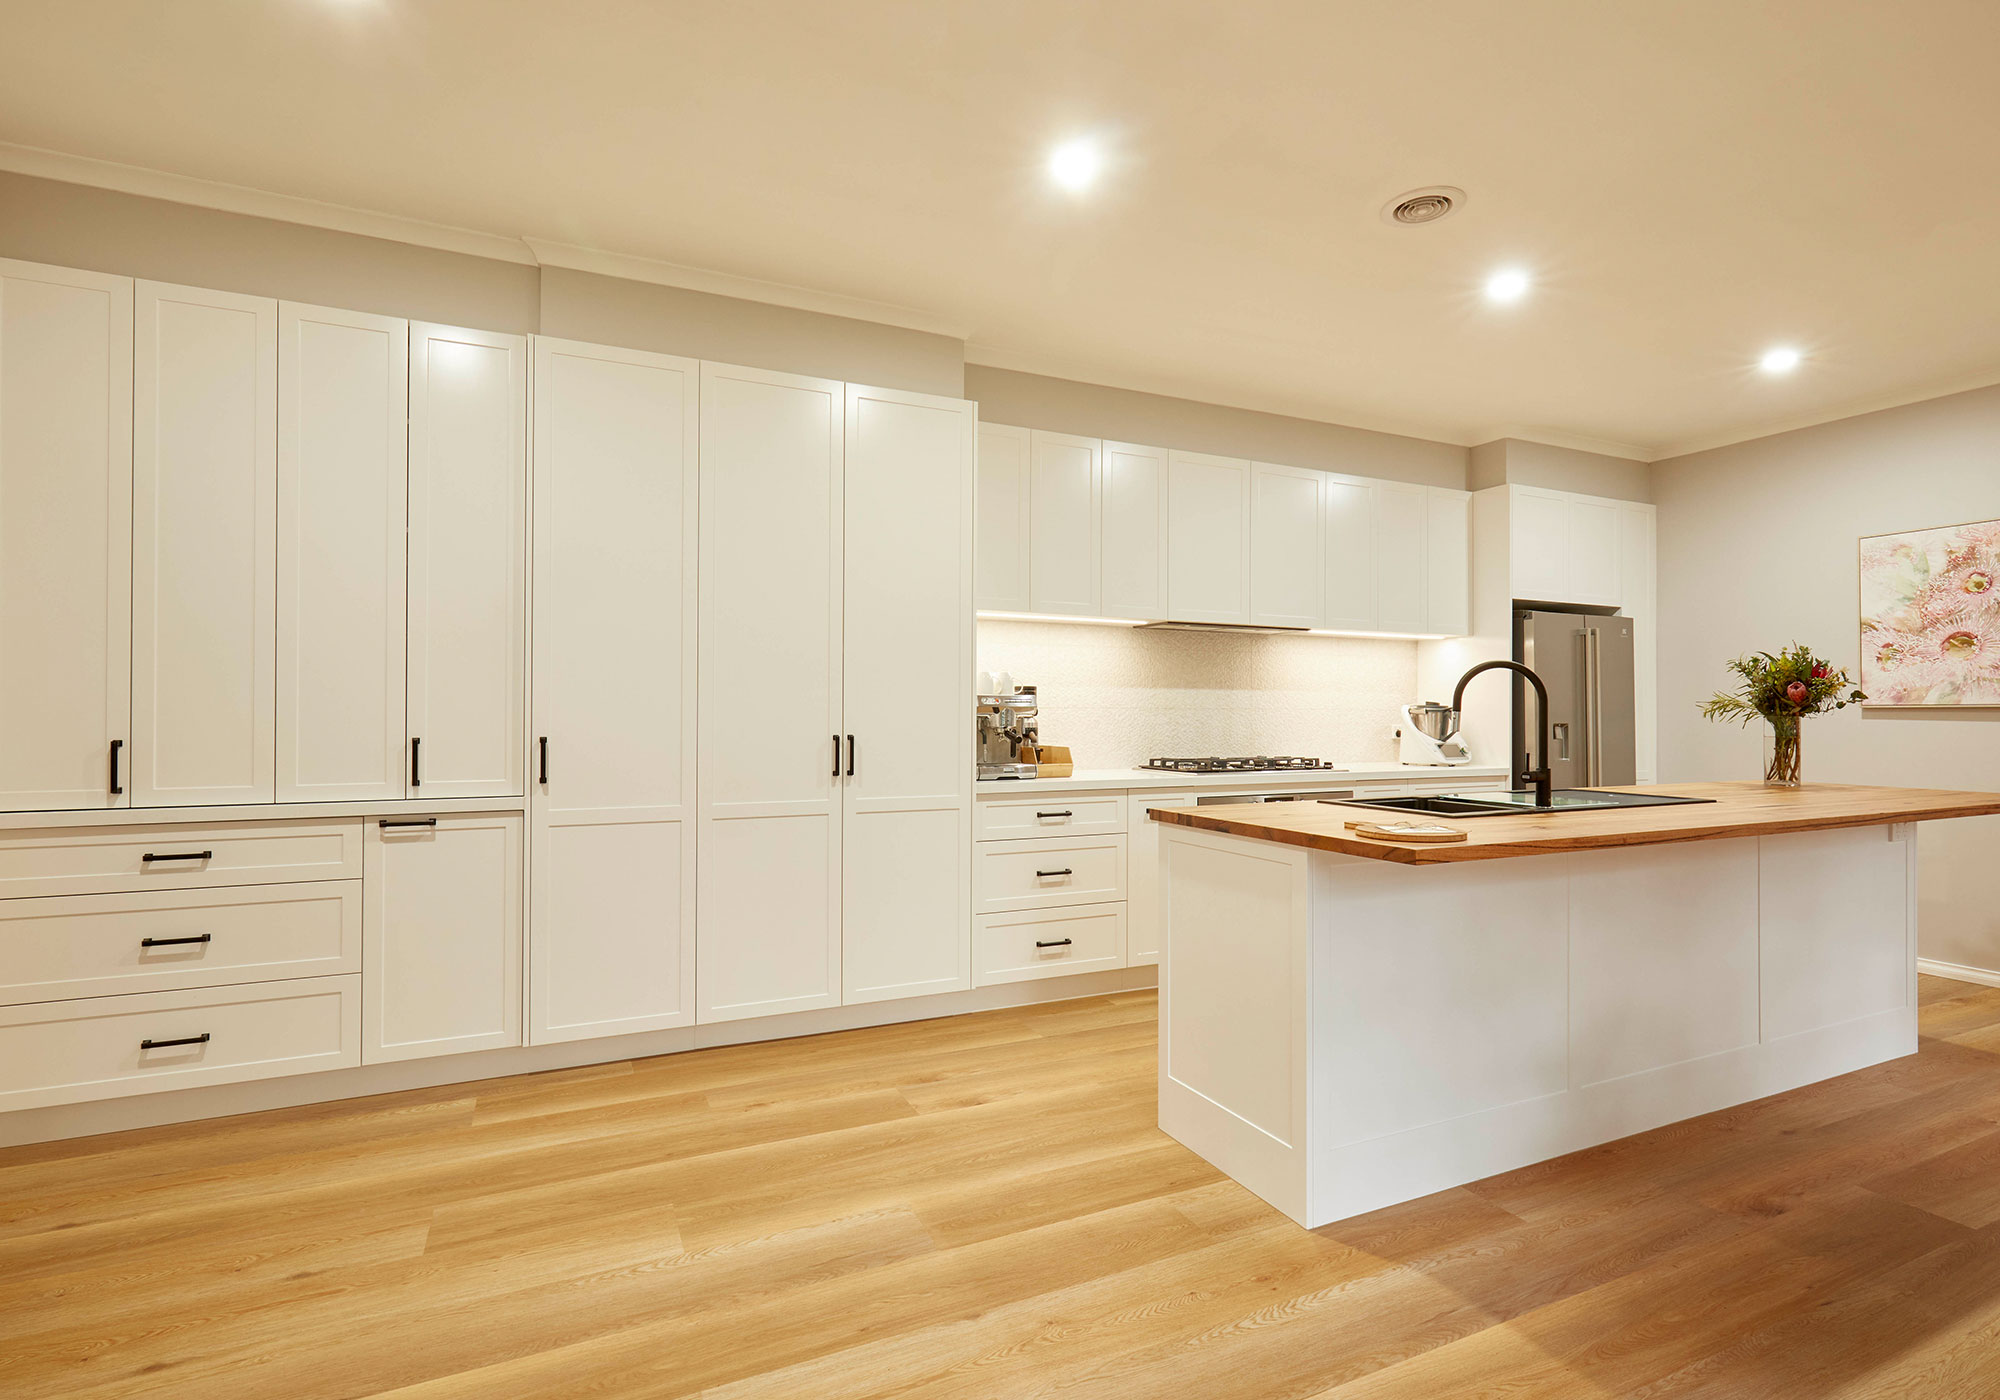 Hamptons Style Kitchen Blampied Project